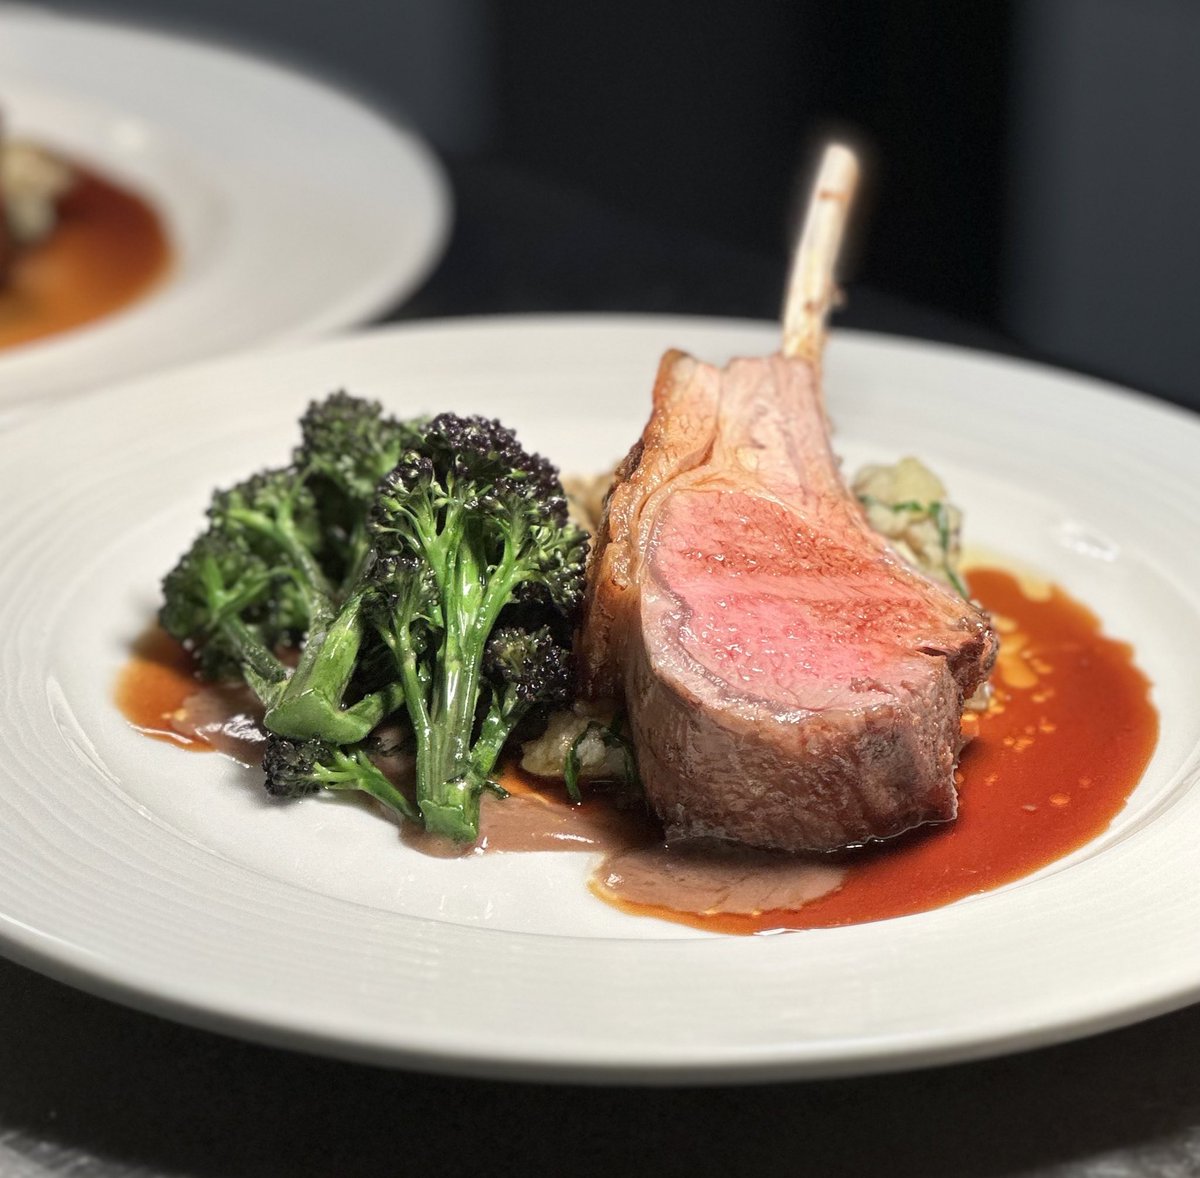 Spring Lamb, Purple Sprouting Broccoli, Anchovy..🍽️
#crownburchettsgreen #todayspecial